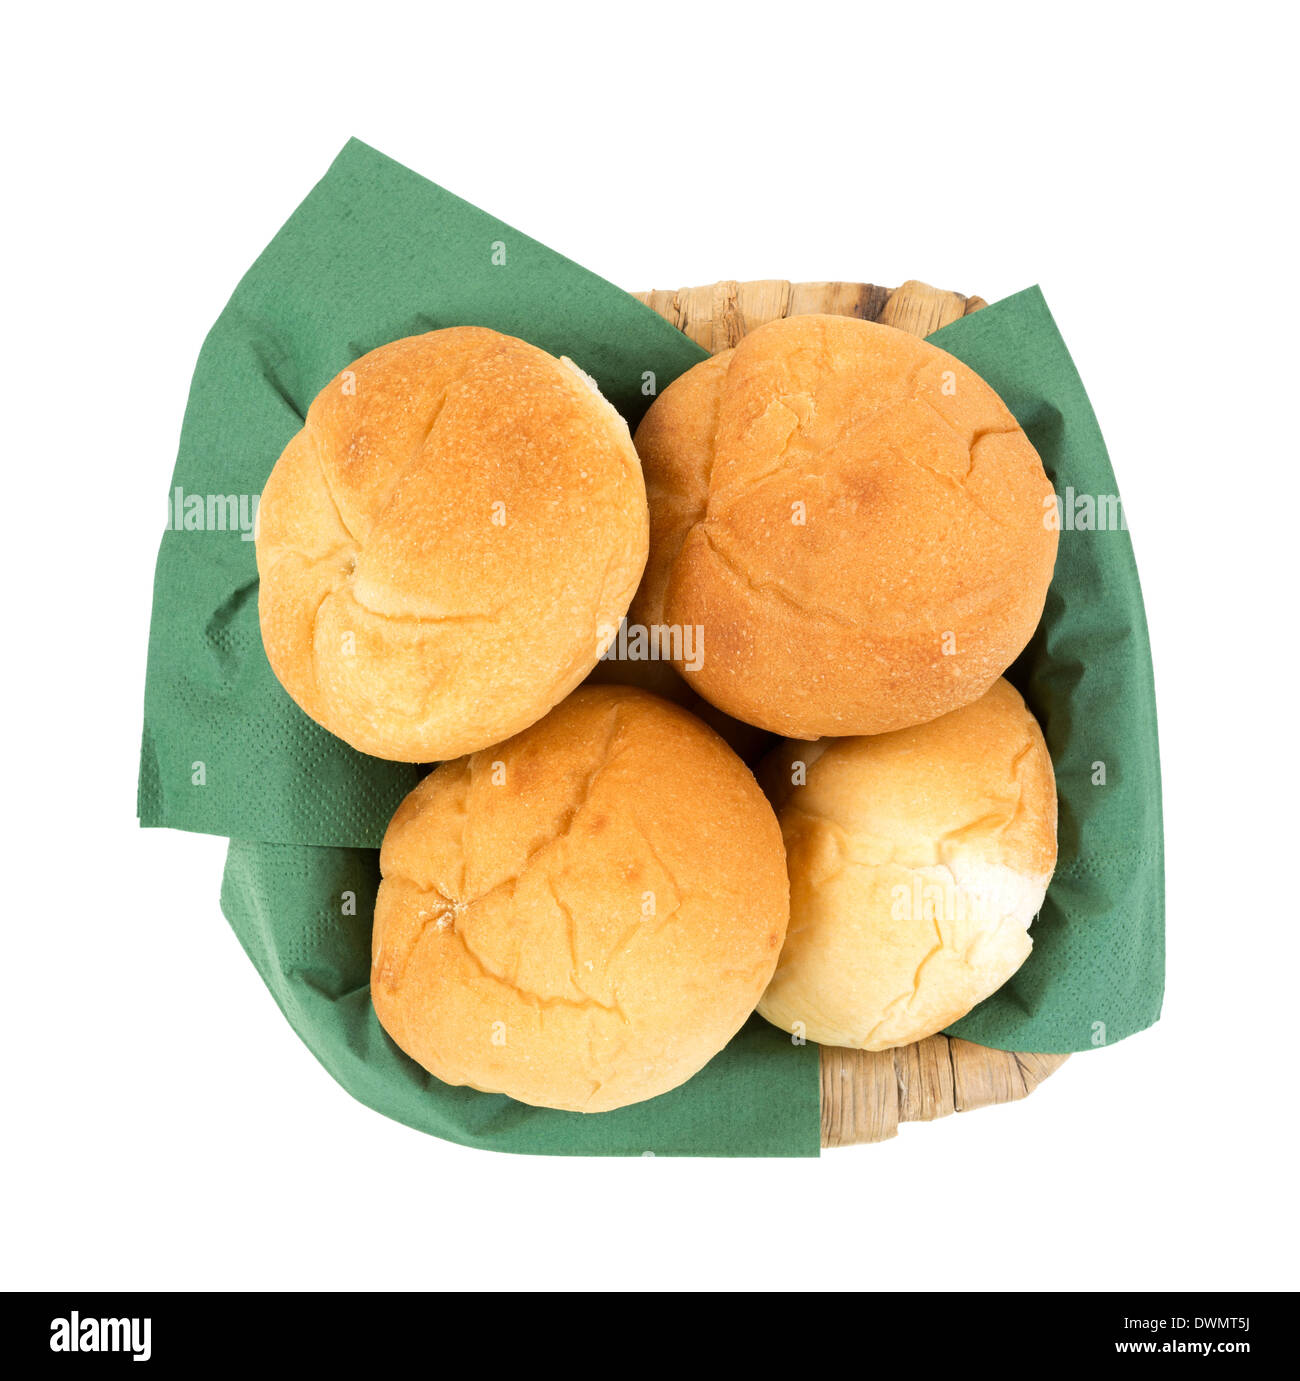 Top view of several freshly baked bulkie rolls in a basket that has been lined with green napkins. Stock Photo